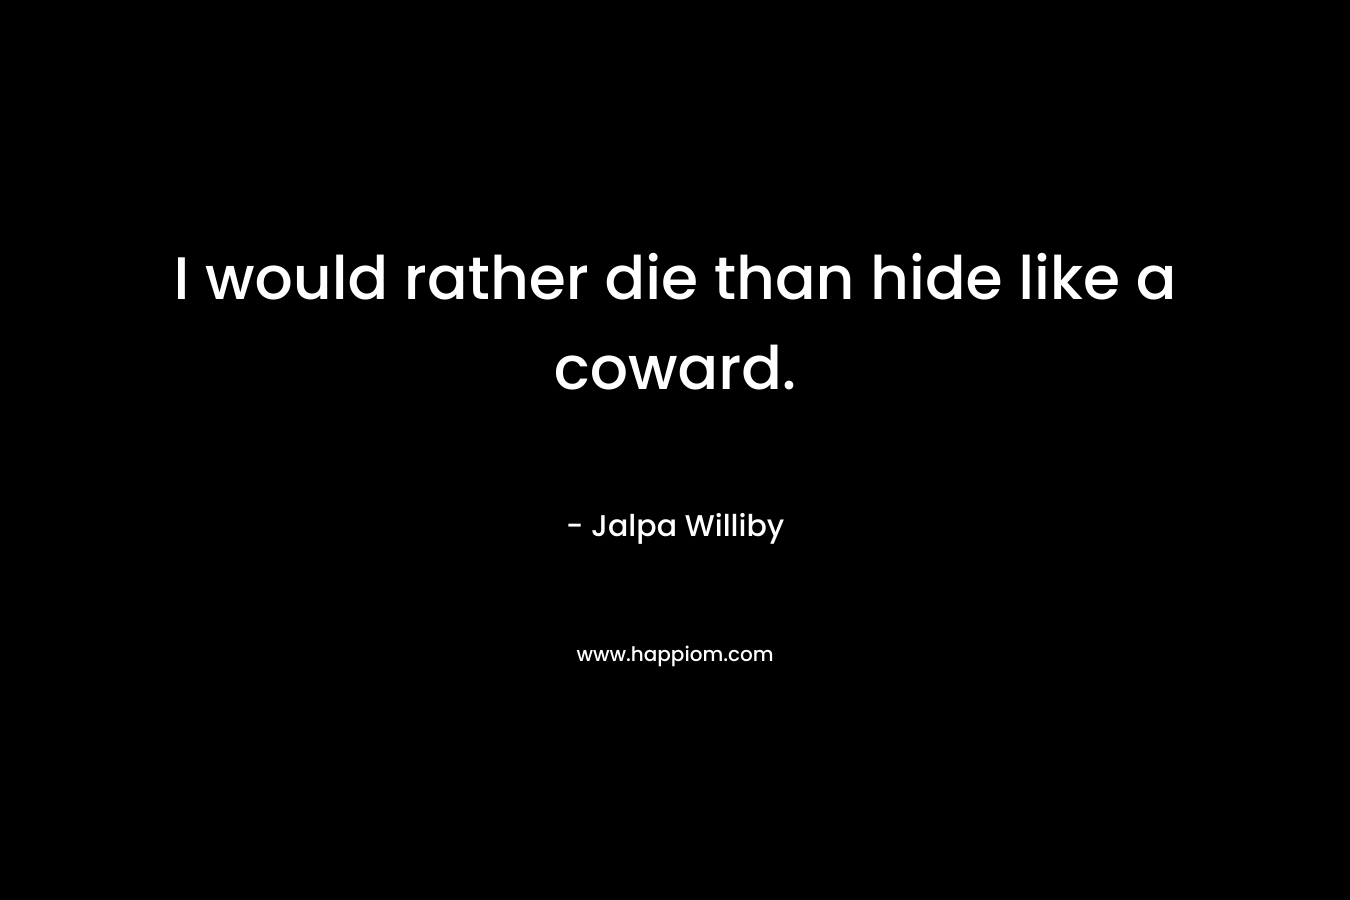 I would rather die than hide like a coward. – Jalpa Williby